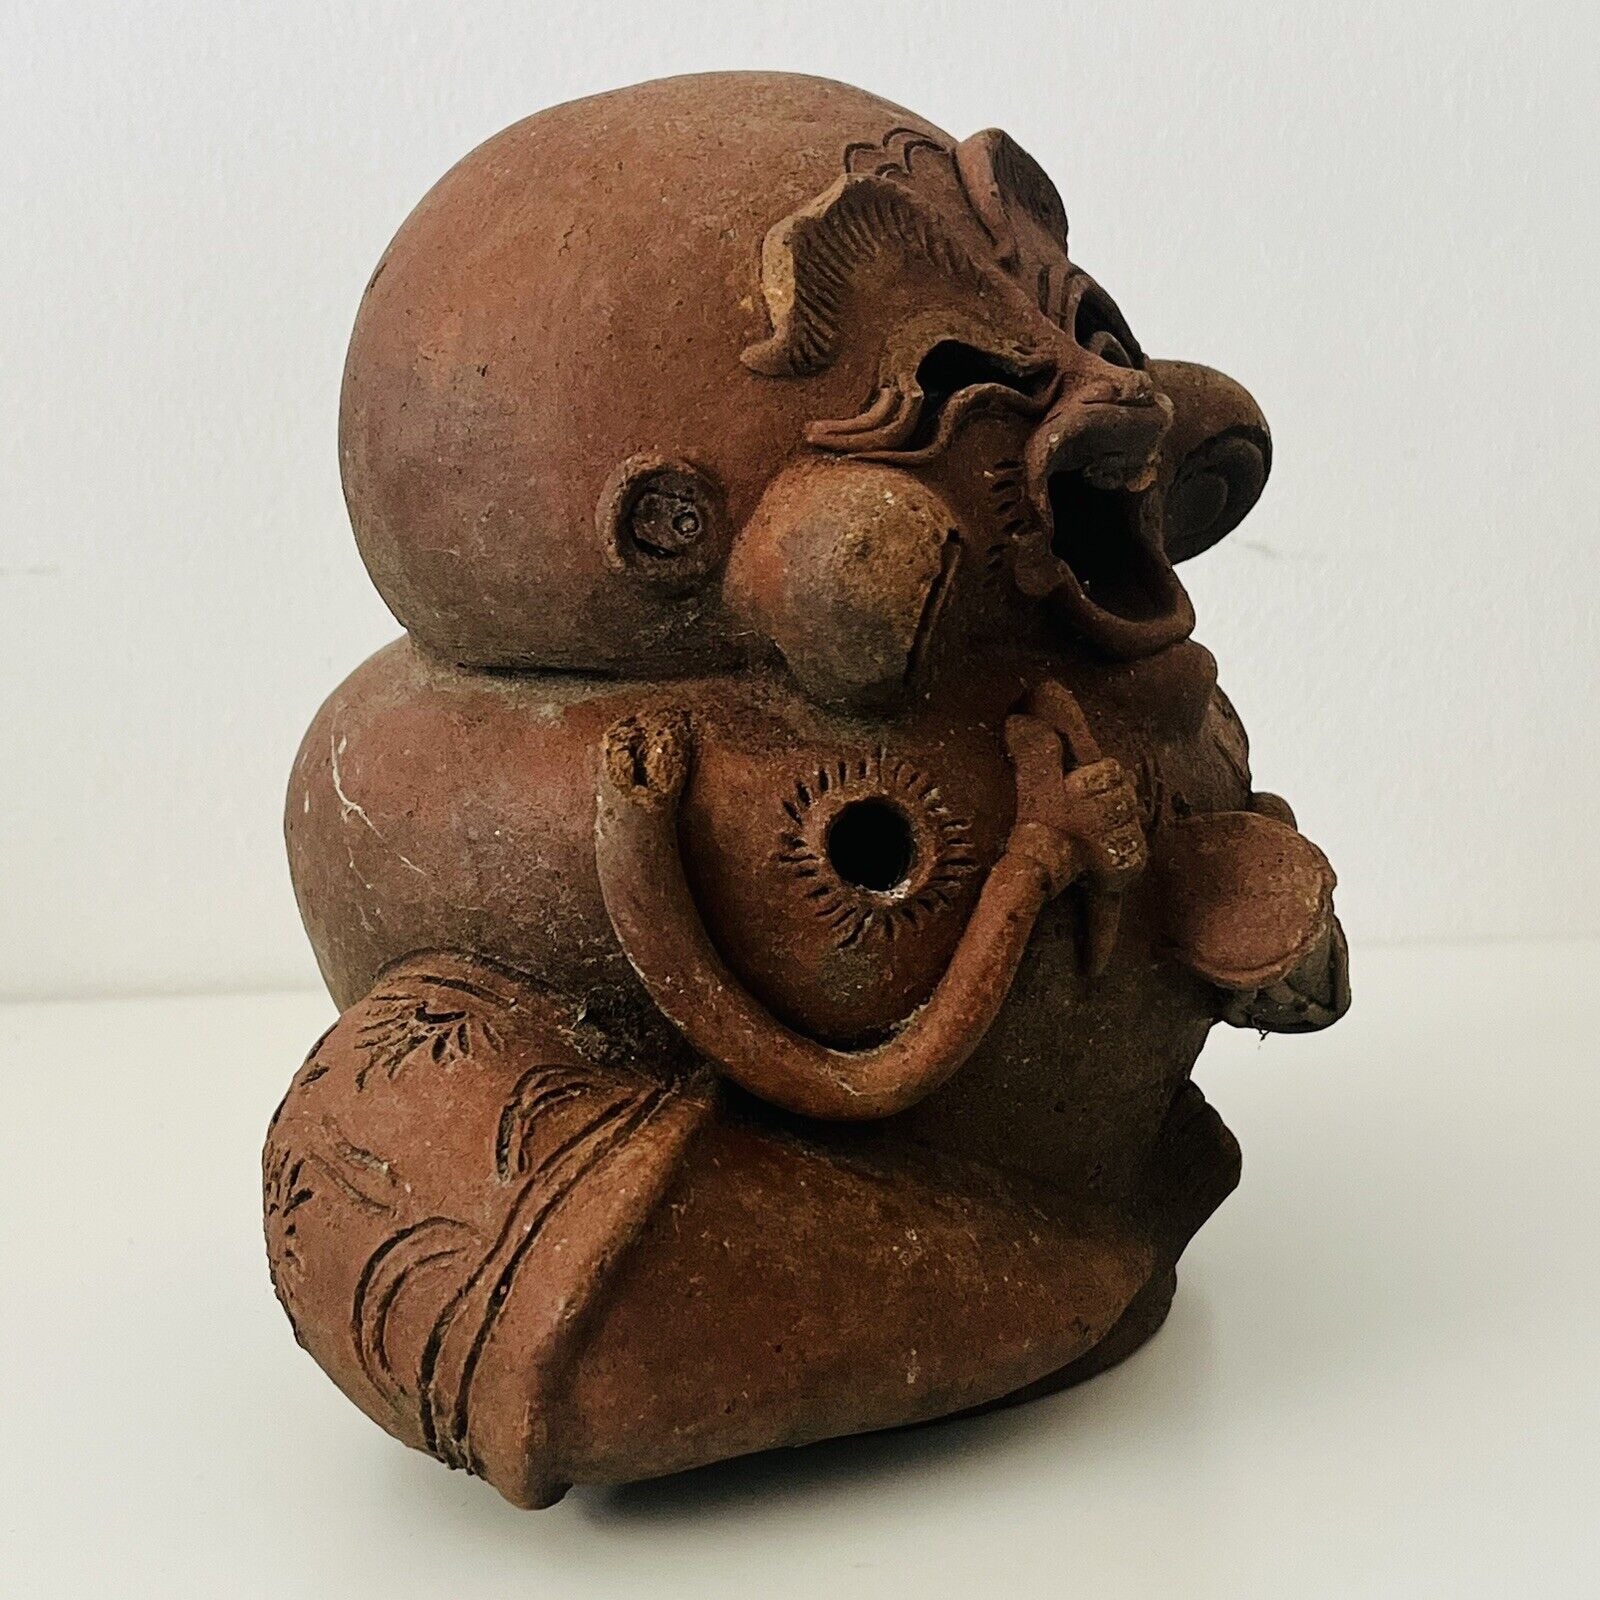 An Unusual Vintage Terracotta Candle Holder Or Figurine of A Laughing Buddha - Image 2 of 8